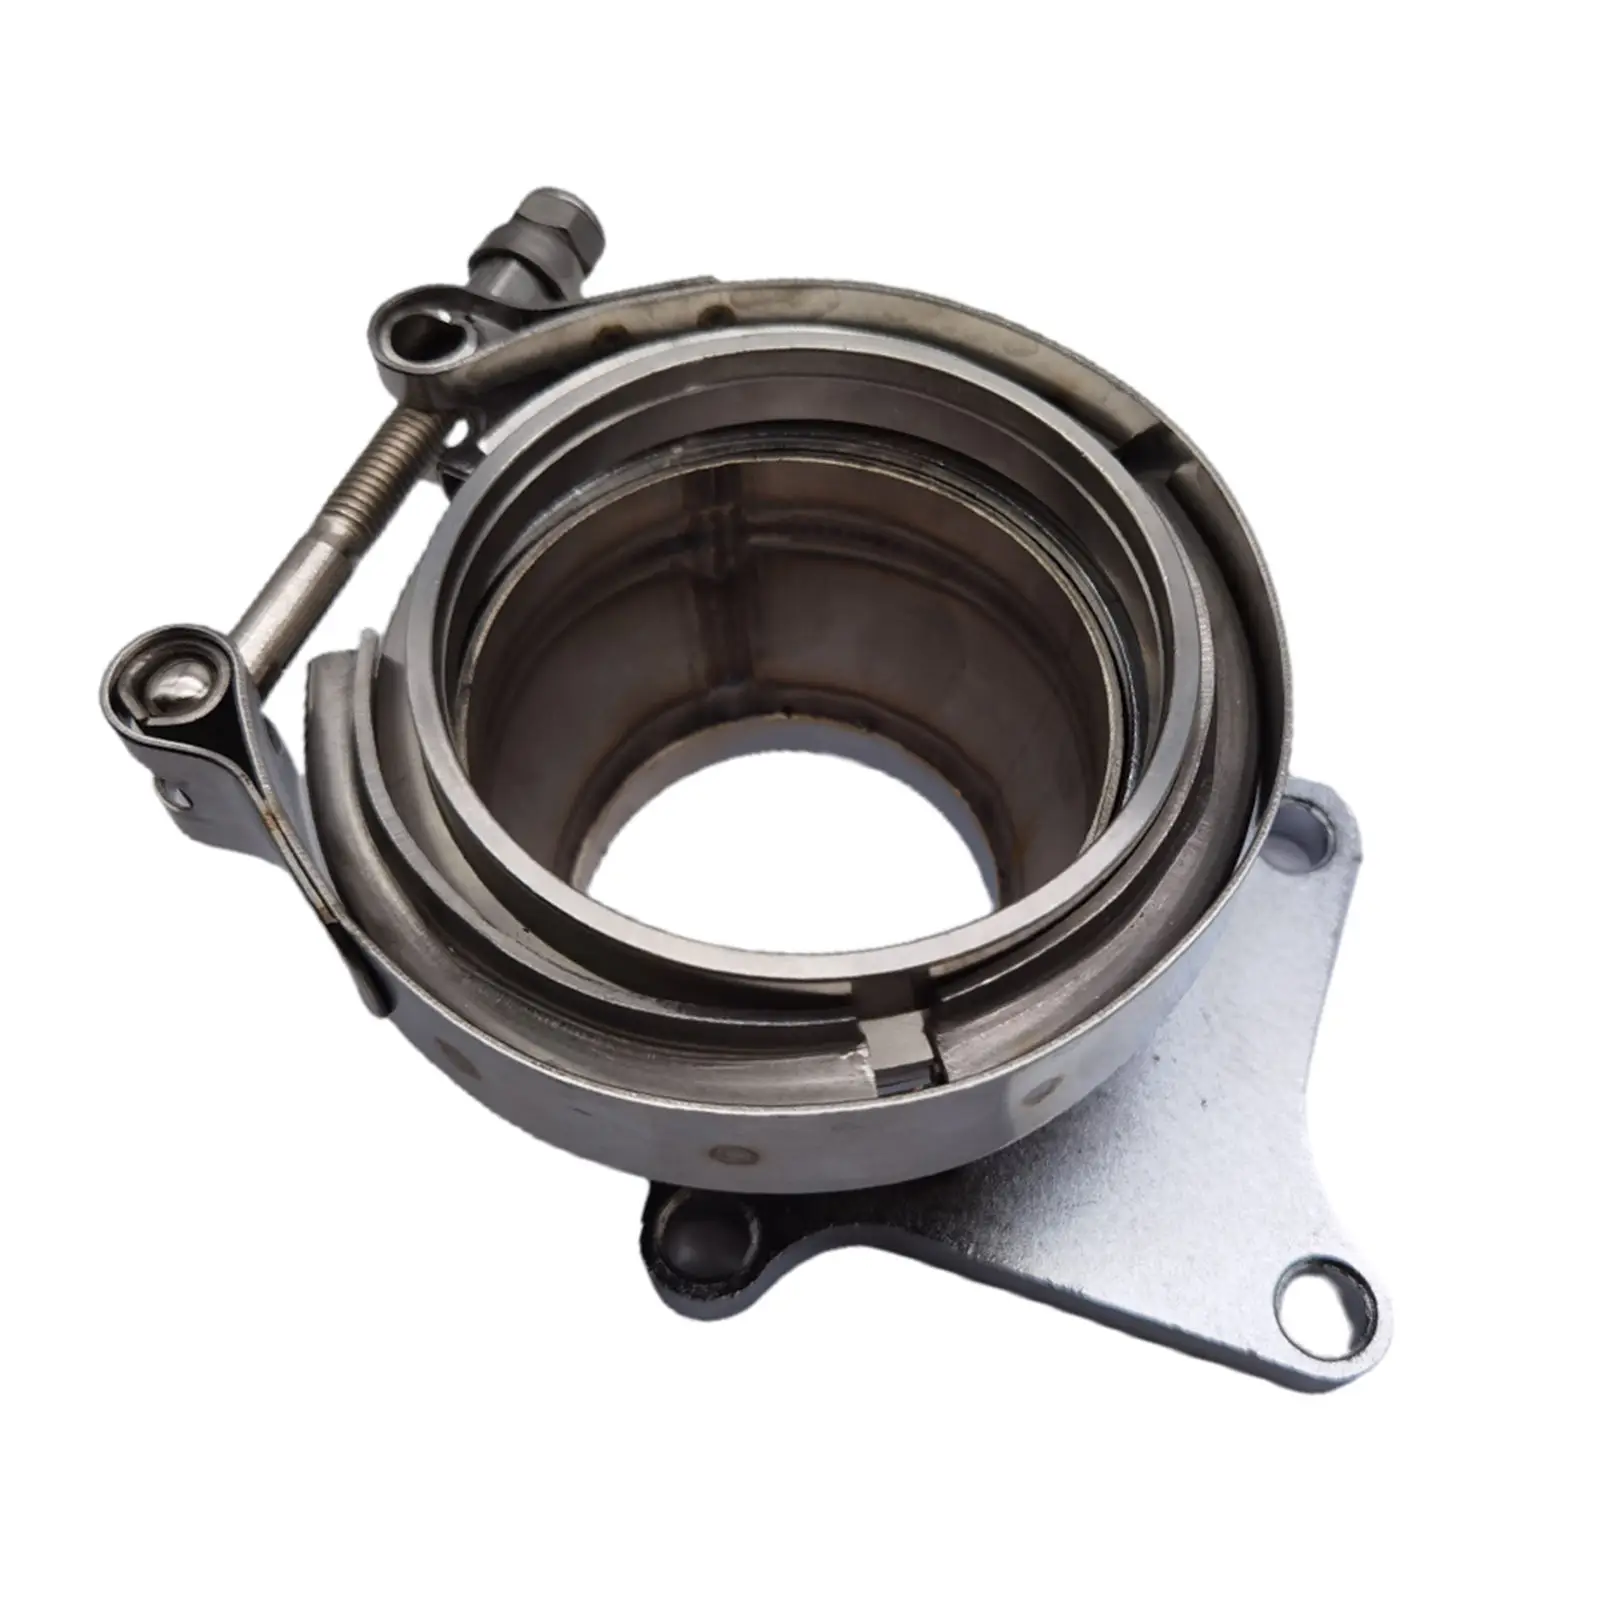 T3 T3/T4 5 Bolt Turbo Downpipe Flange to 2.5